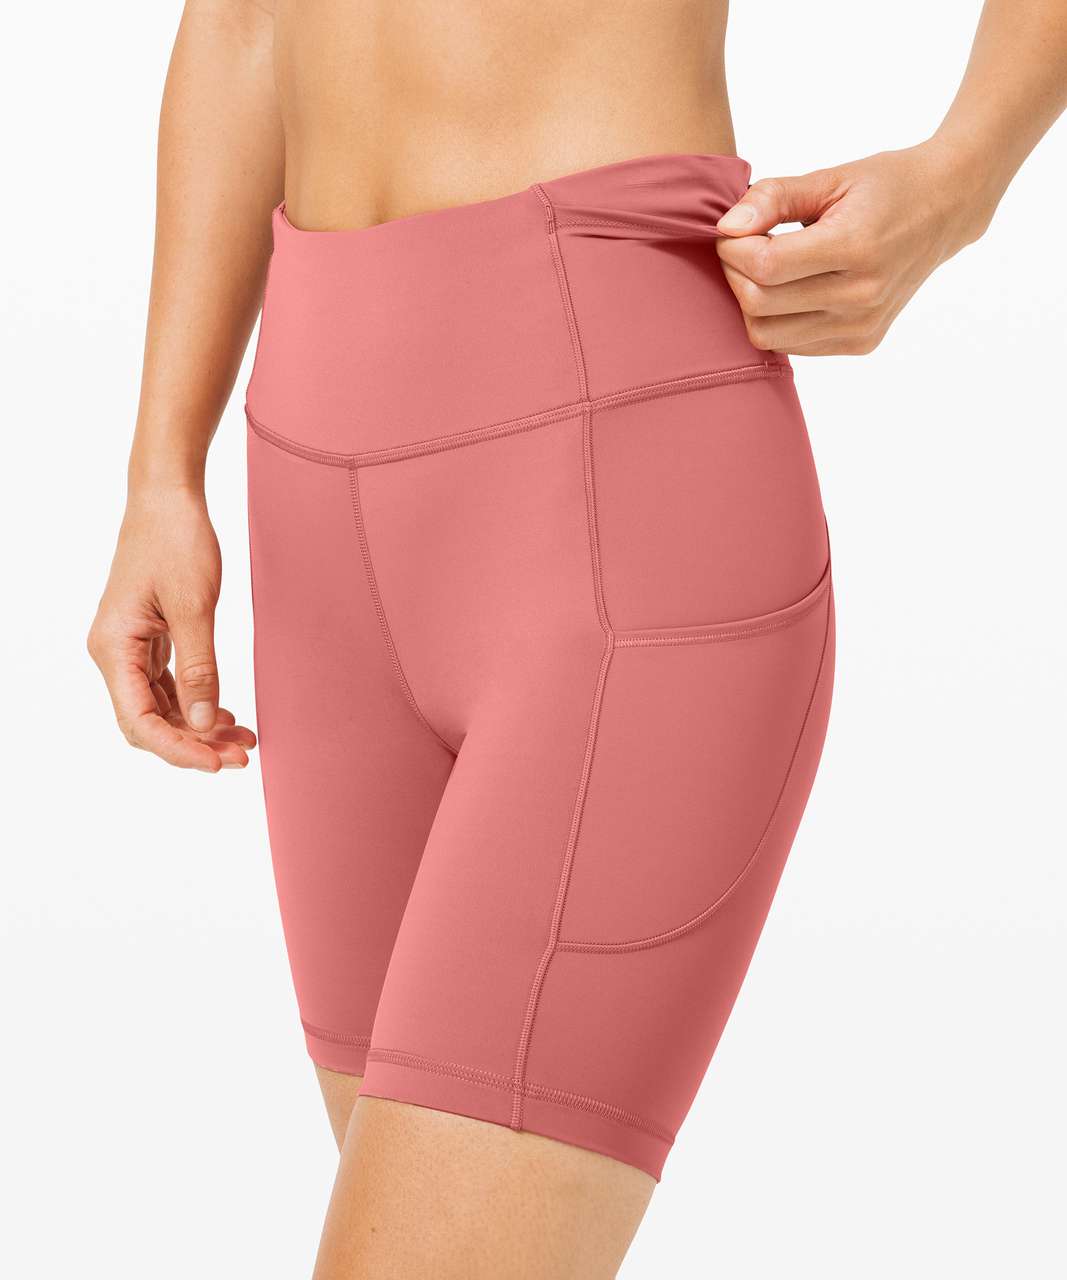 Lululemon Fast And Free Short 8" *Non-Reflective - Cherry Tint